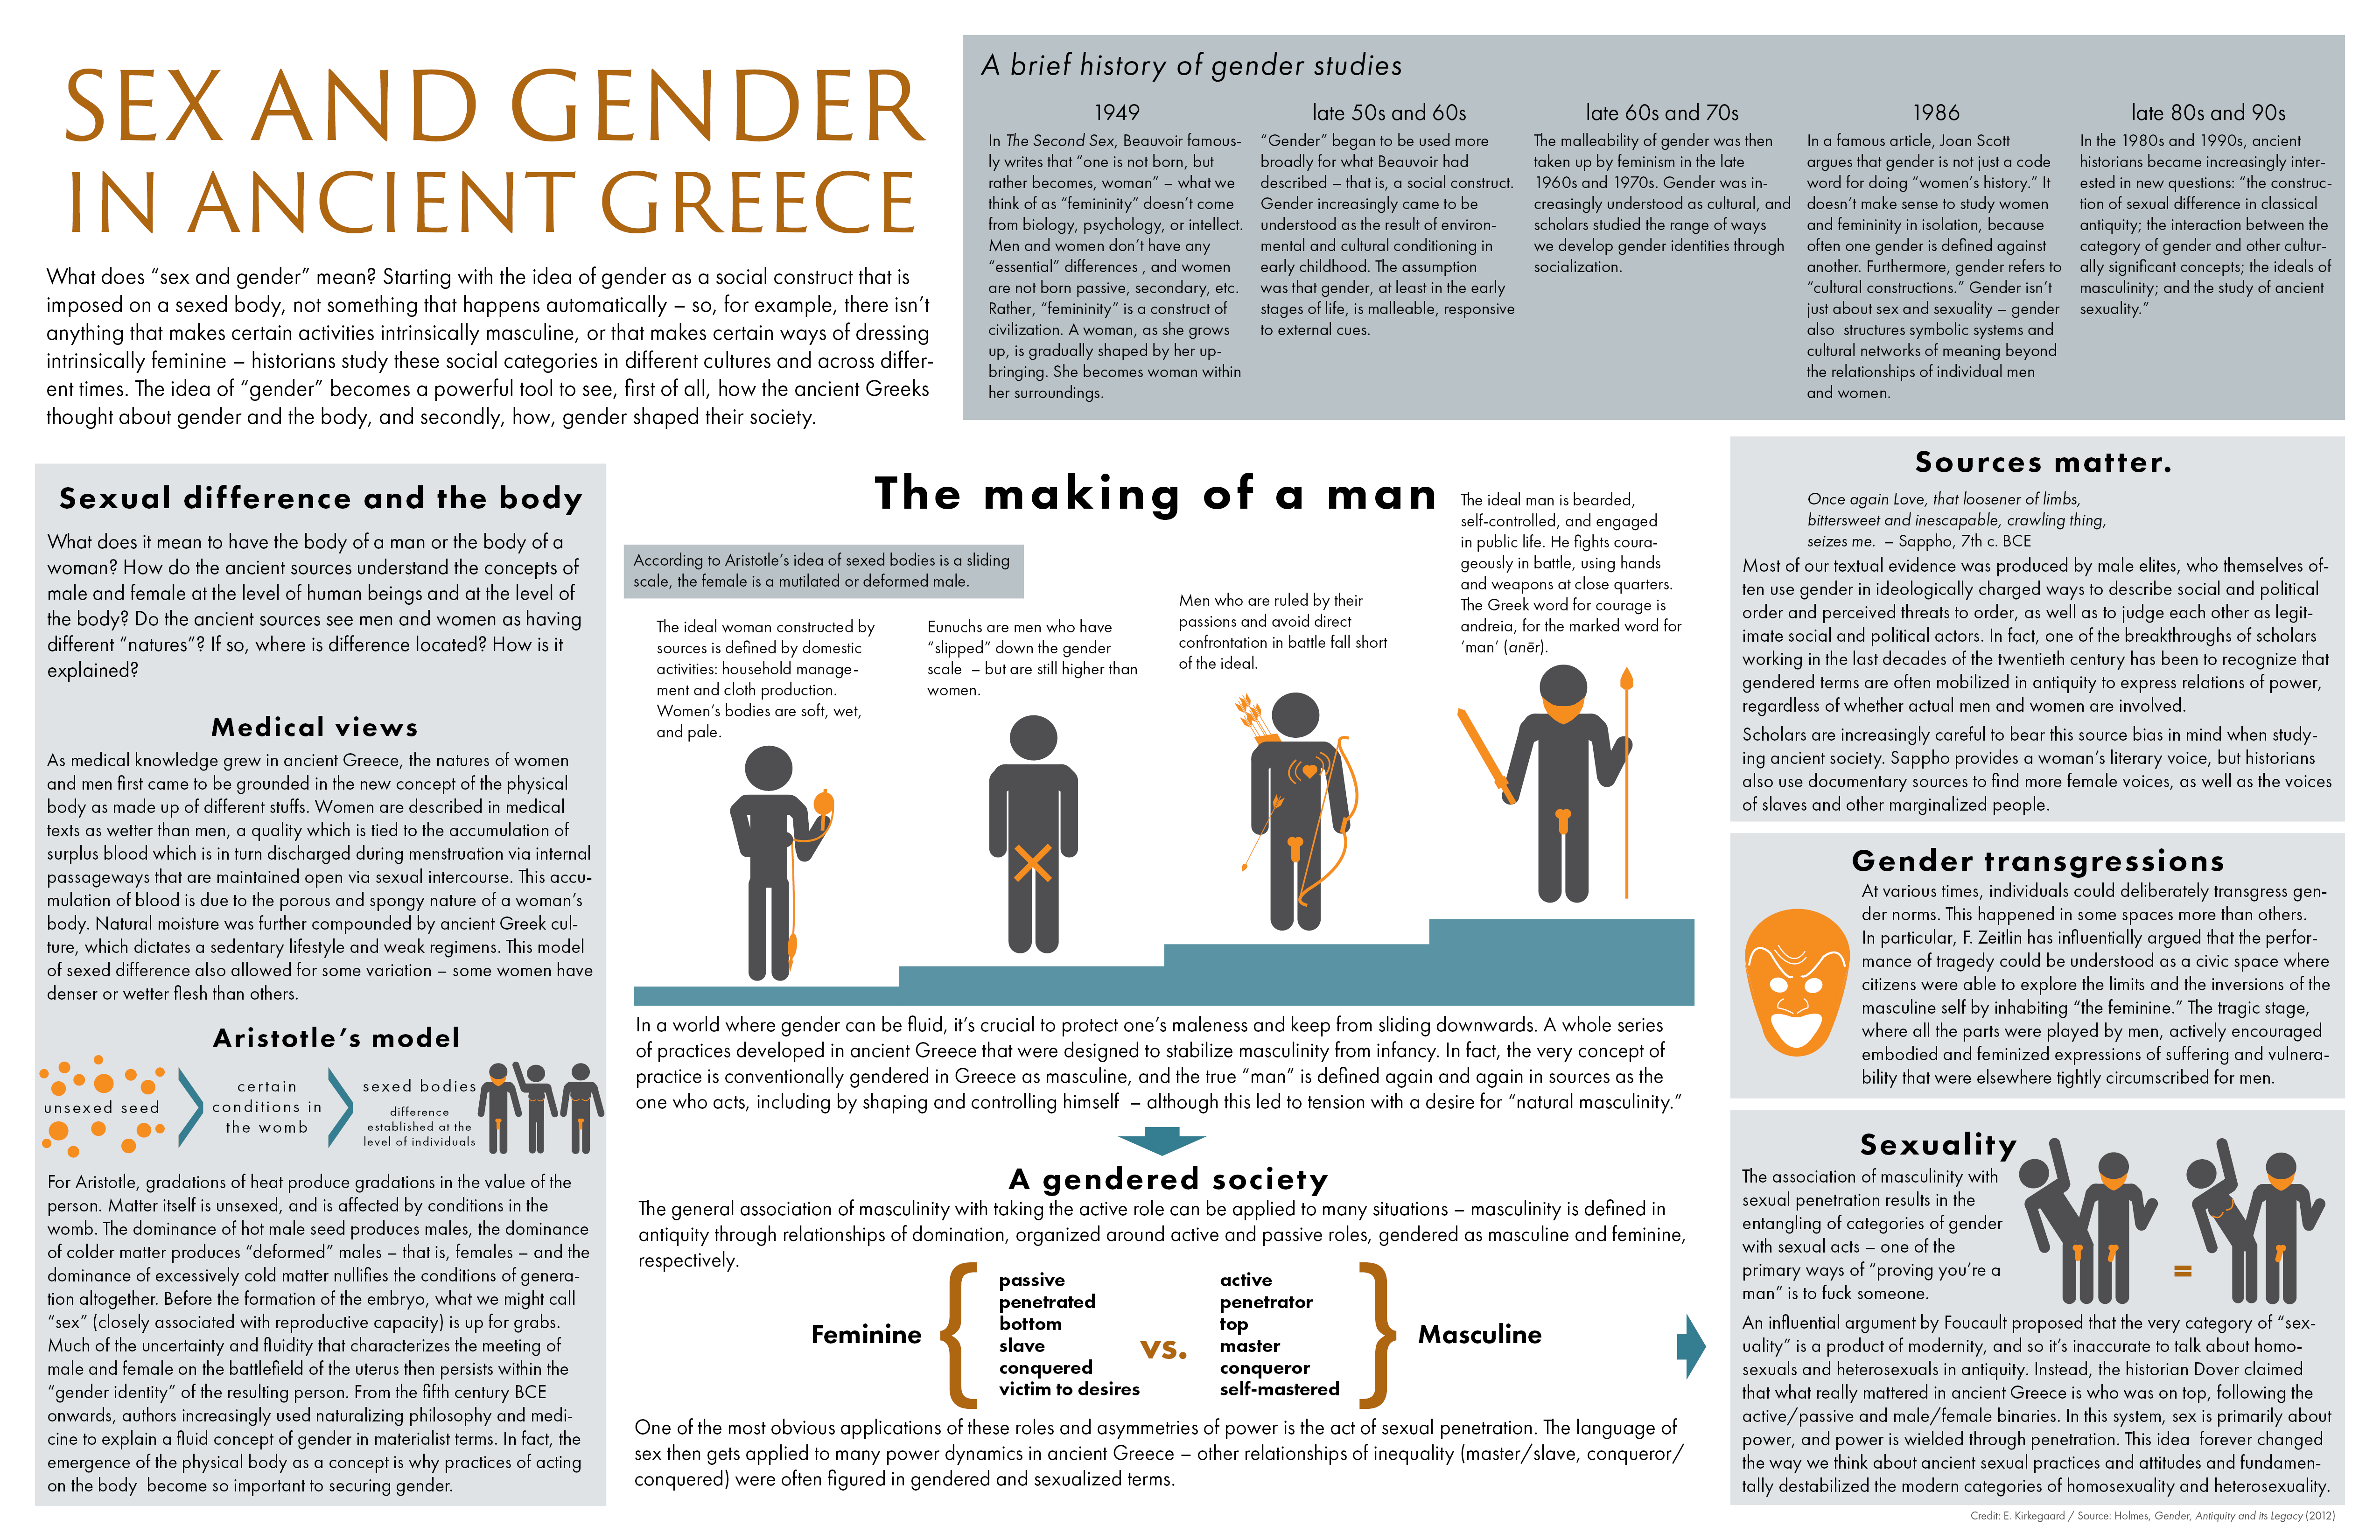 Gender Roles In Ancient Greece Roles Of Men And Women In Ancient Greece 2019 02 24